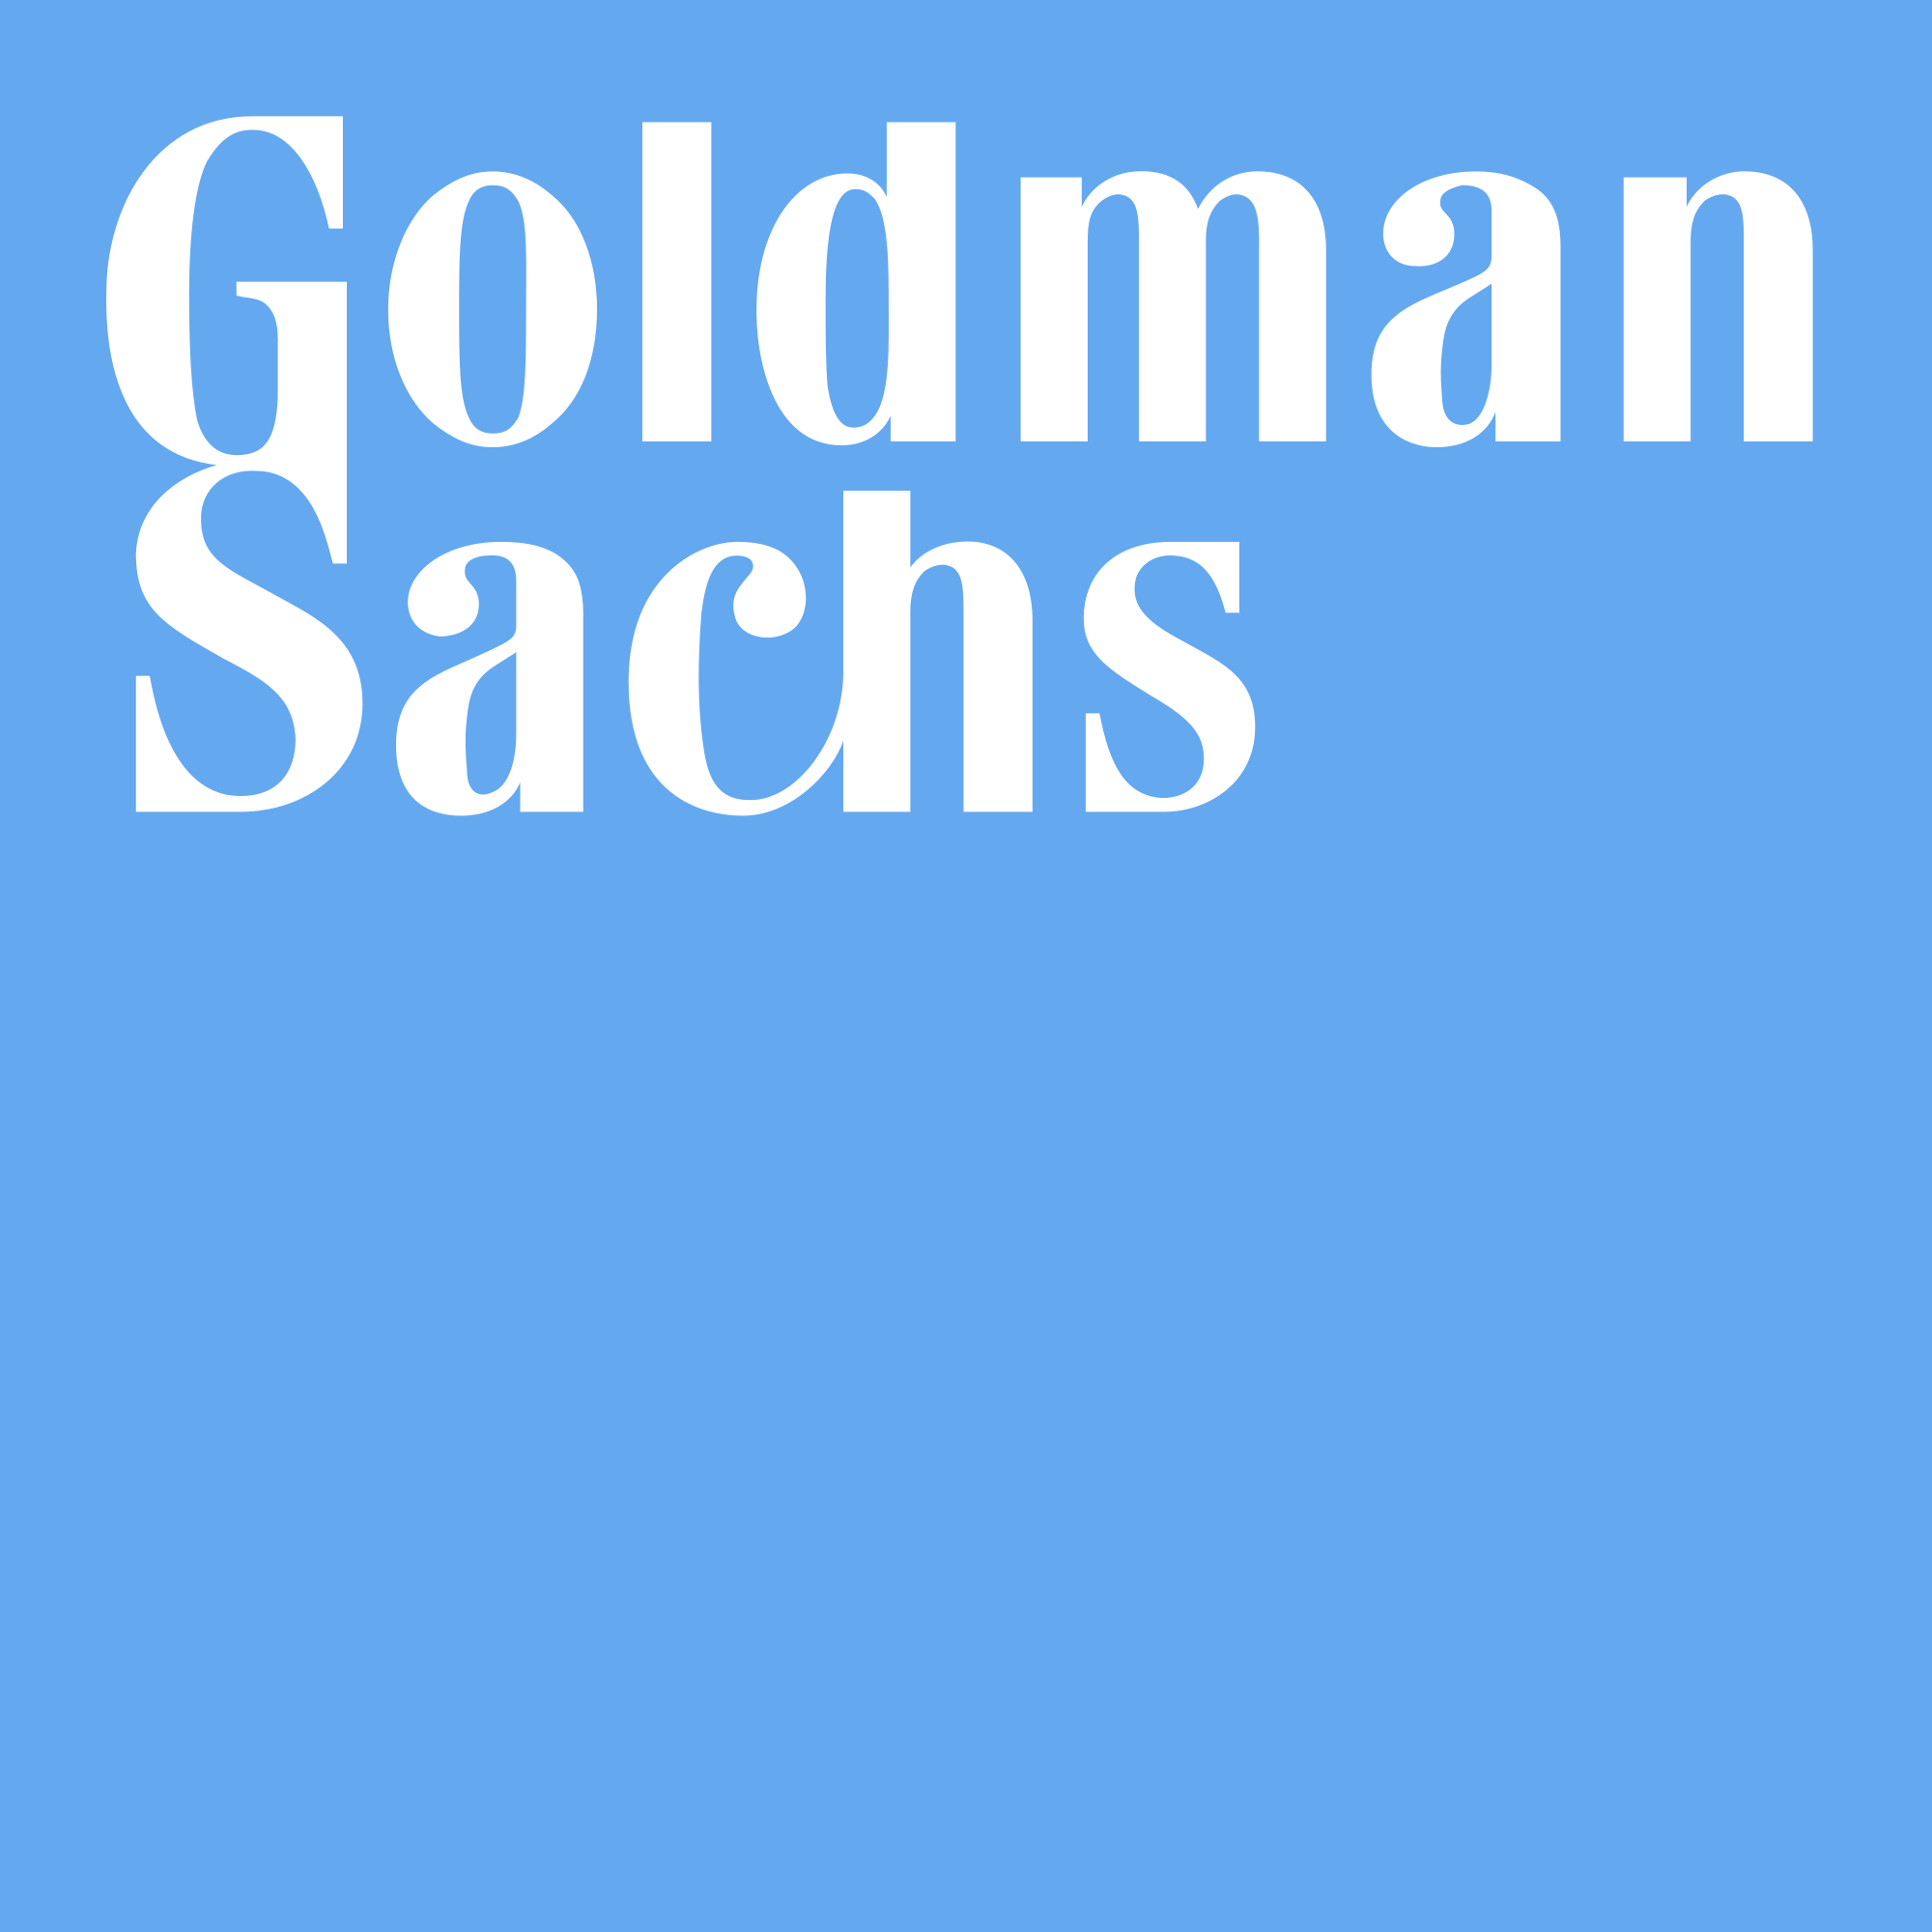 Customers Reviews about Goldman Sachs